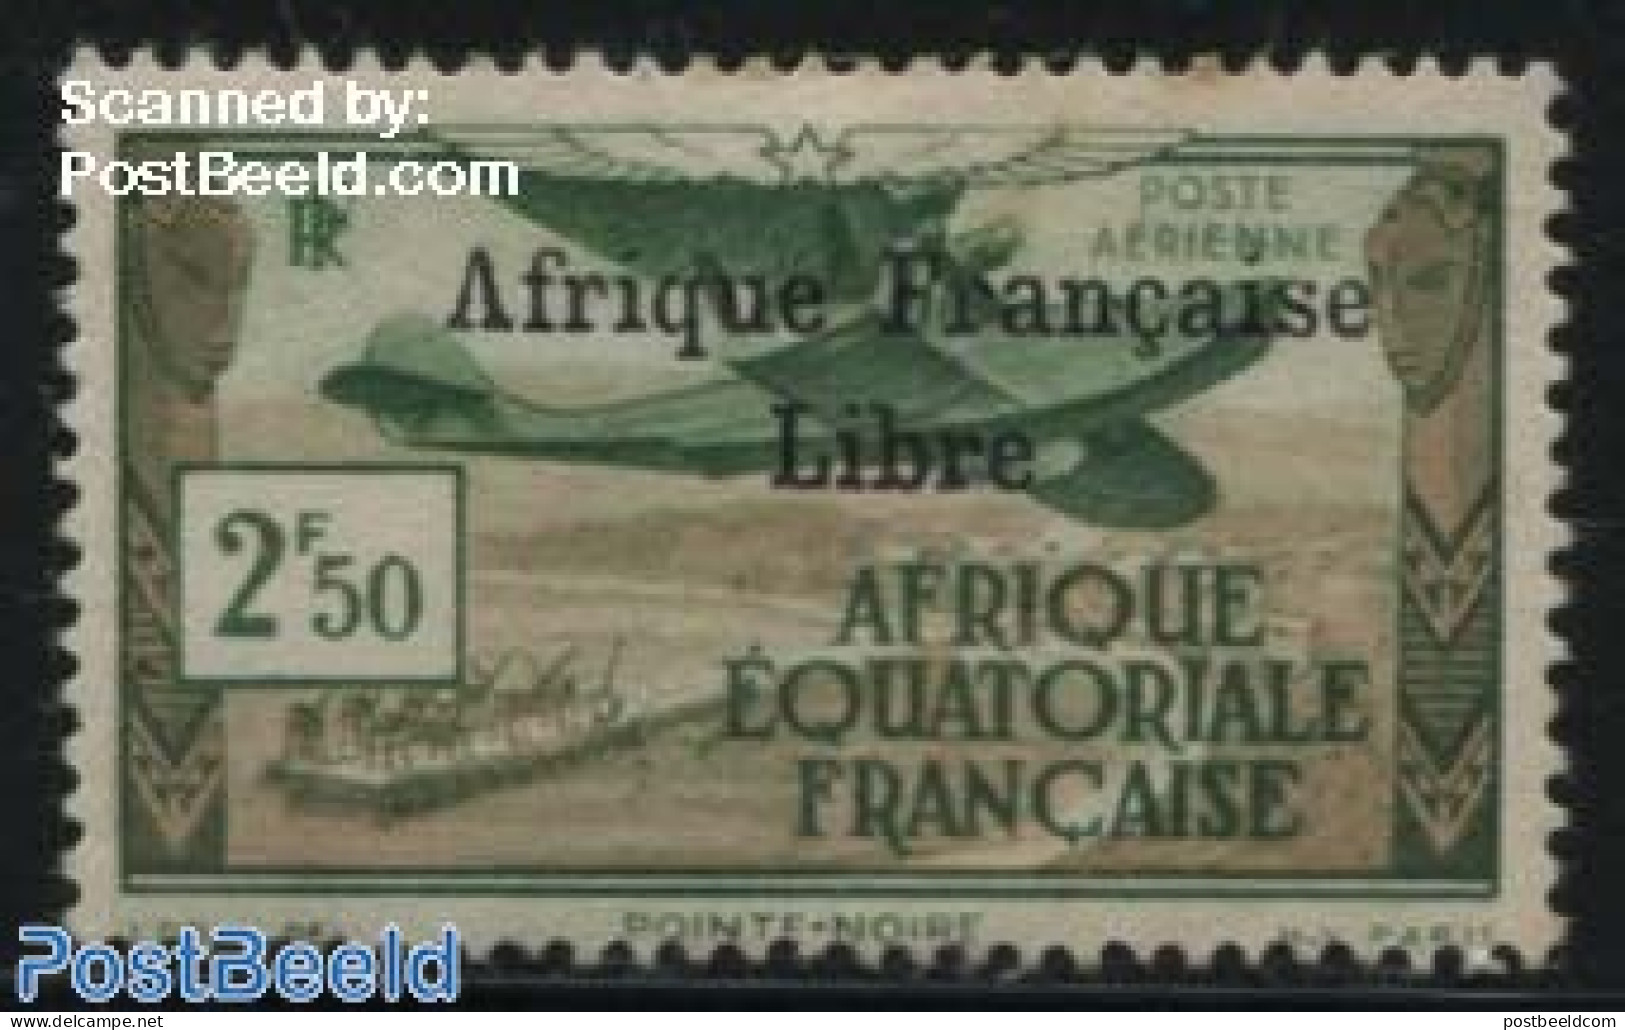 French Equatorial Africa 1940 1.50F, Stamp Out Of Set, Mint NH, Transport - Aircraft & Aviation - Ongebruikt